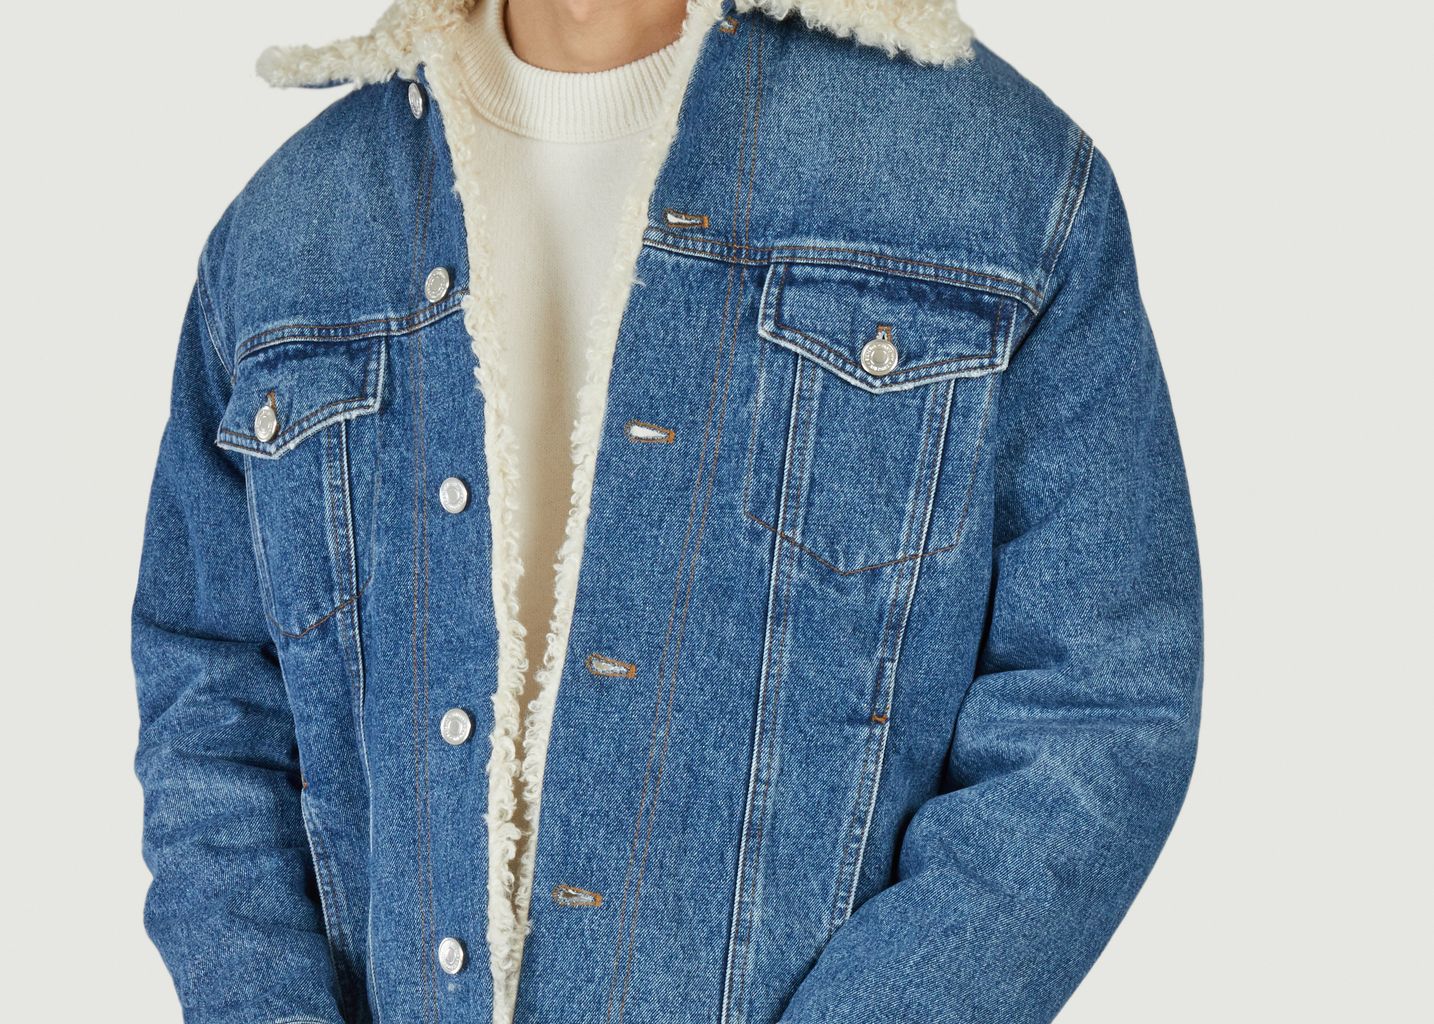 Lined Jean Jacket With Fur - AMI Paris